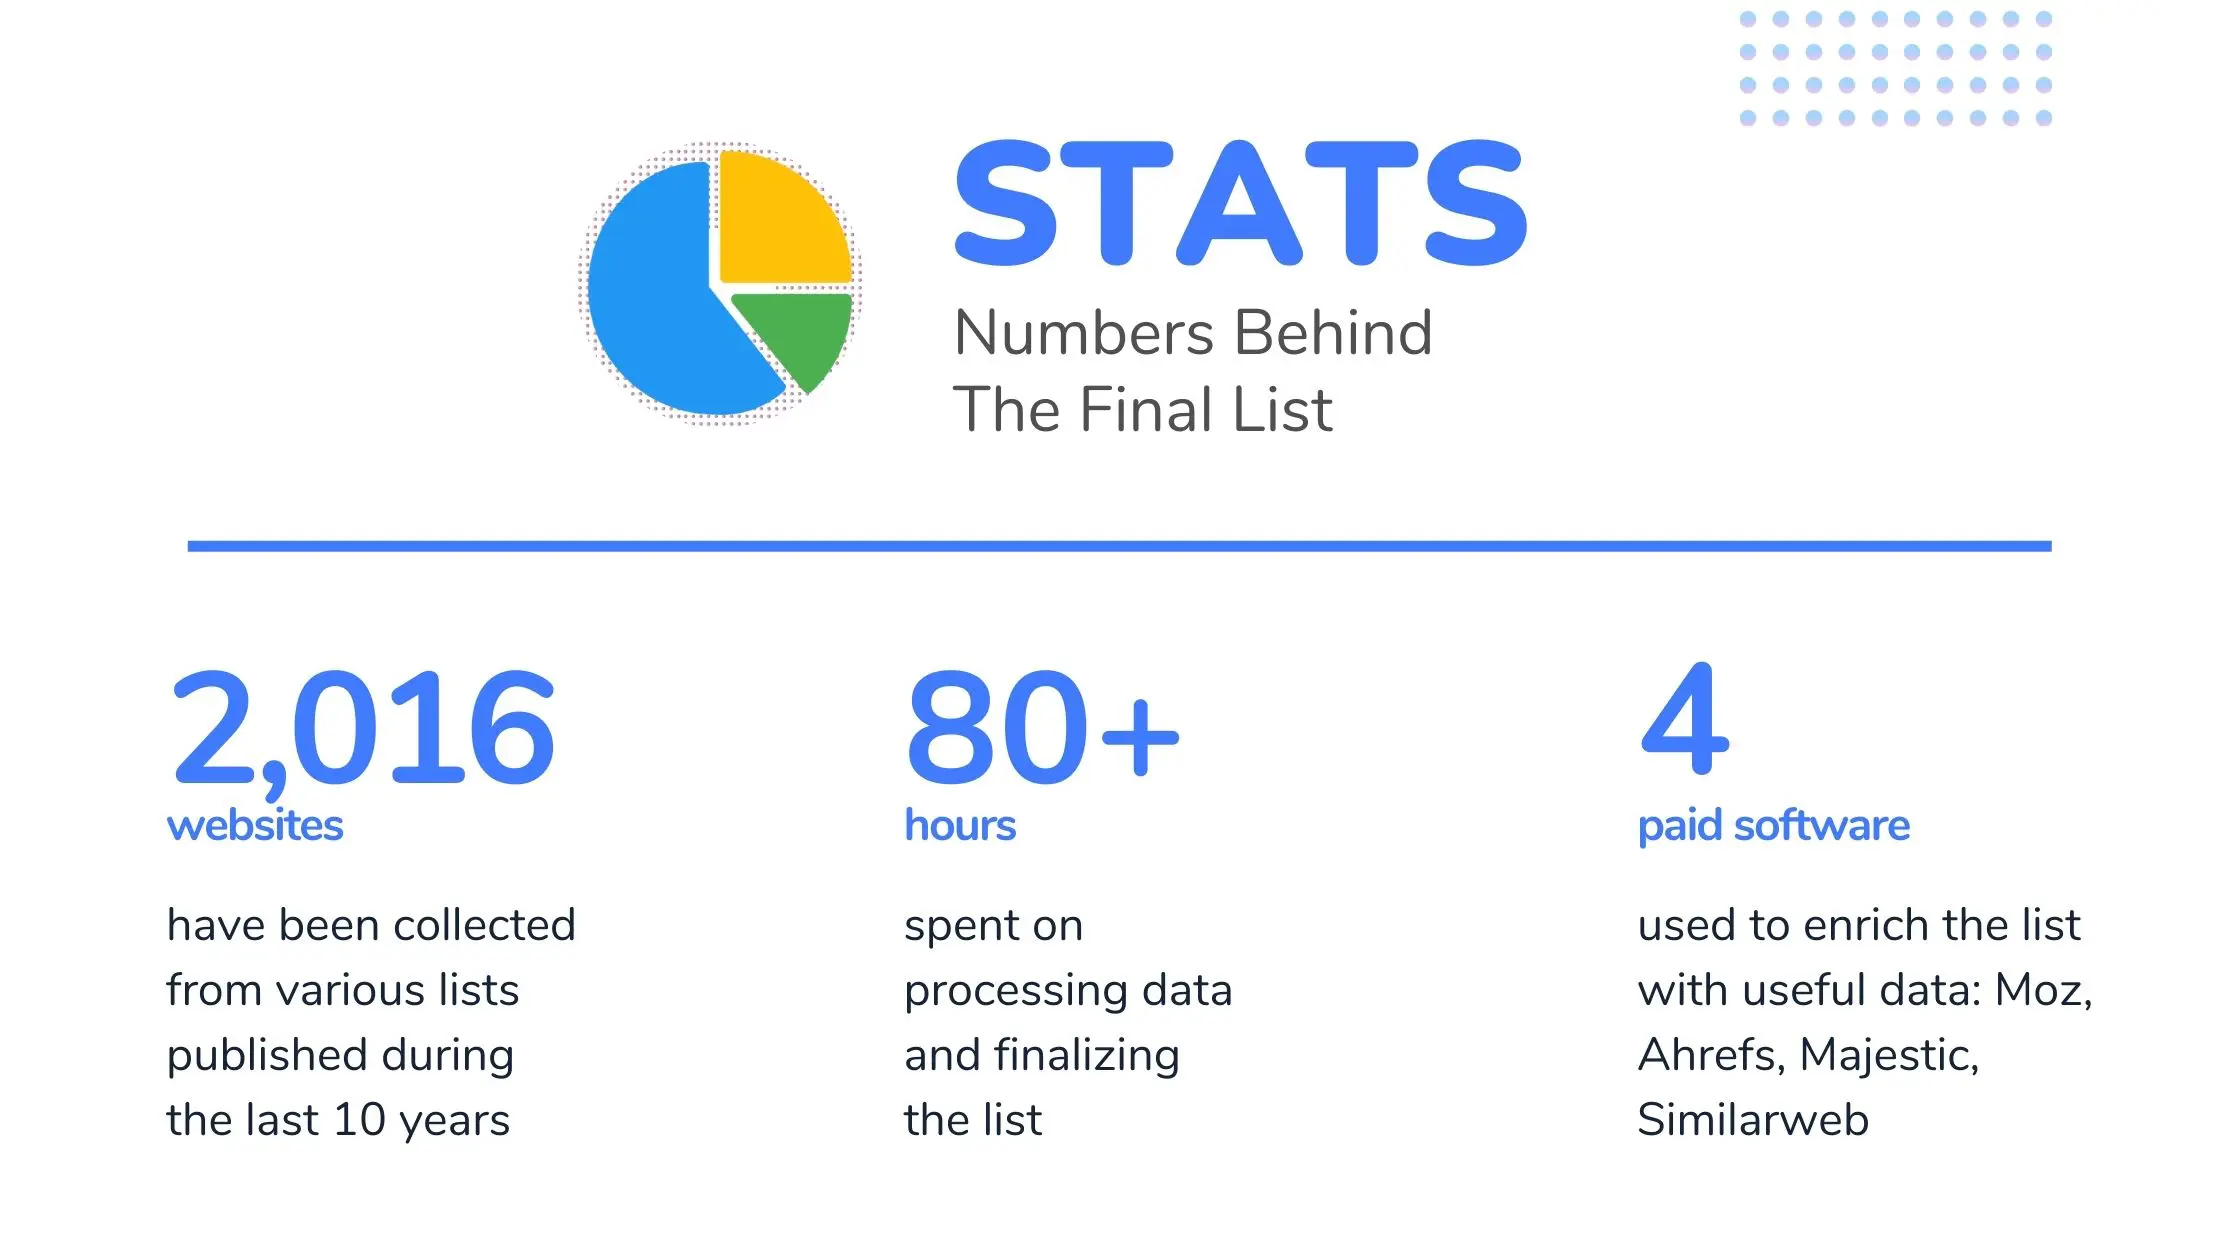 List numbers: 2016 collected websites, 80+ hours processing data, 4 paid software used